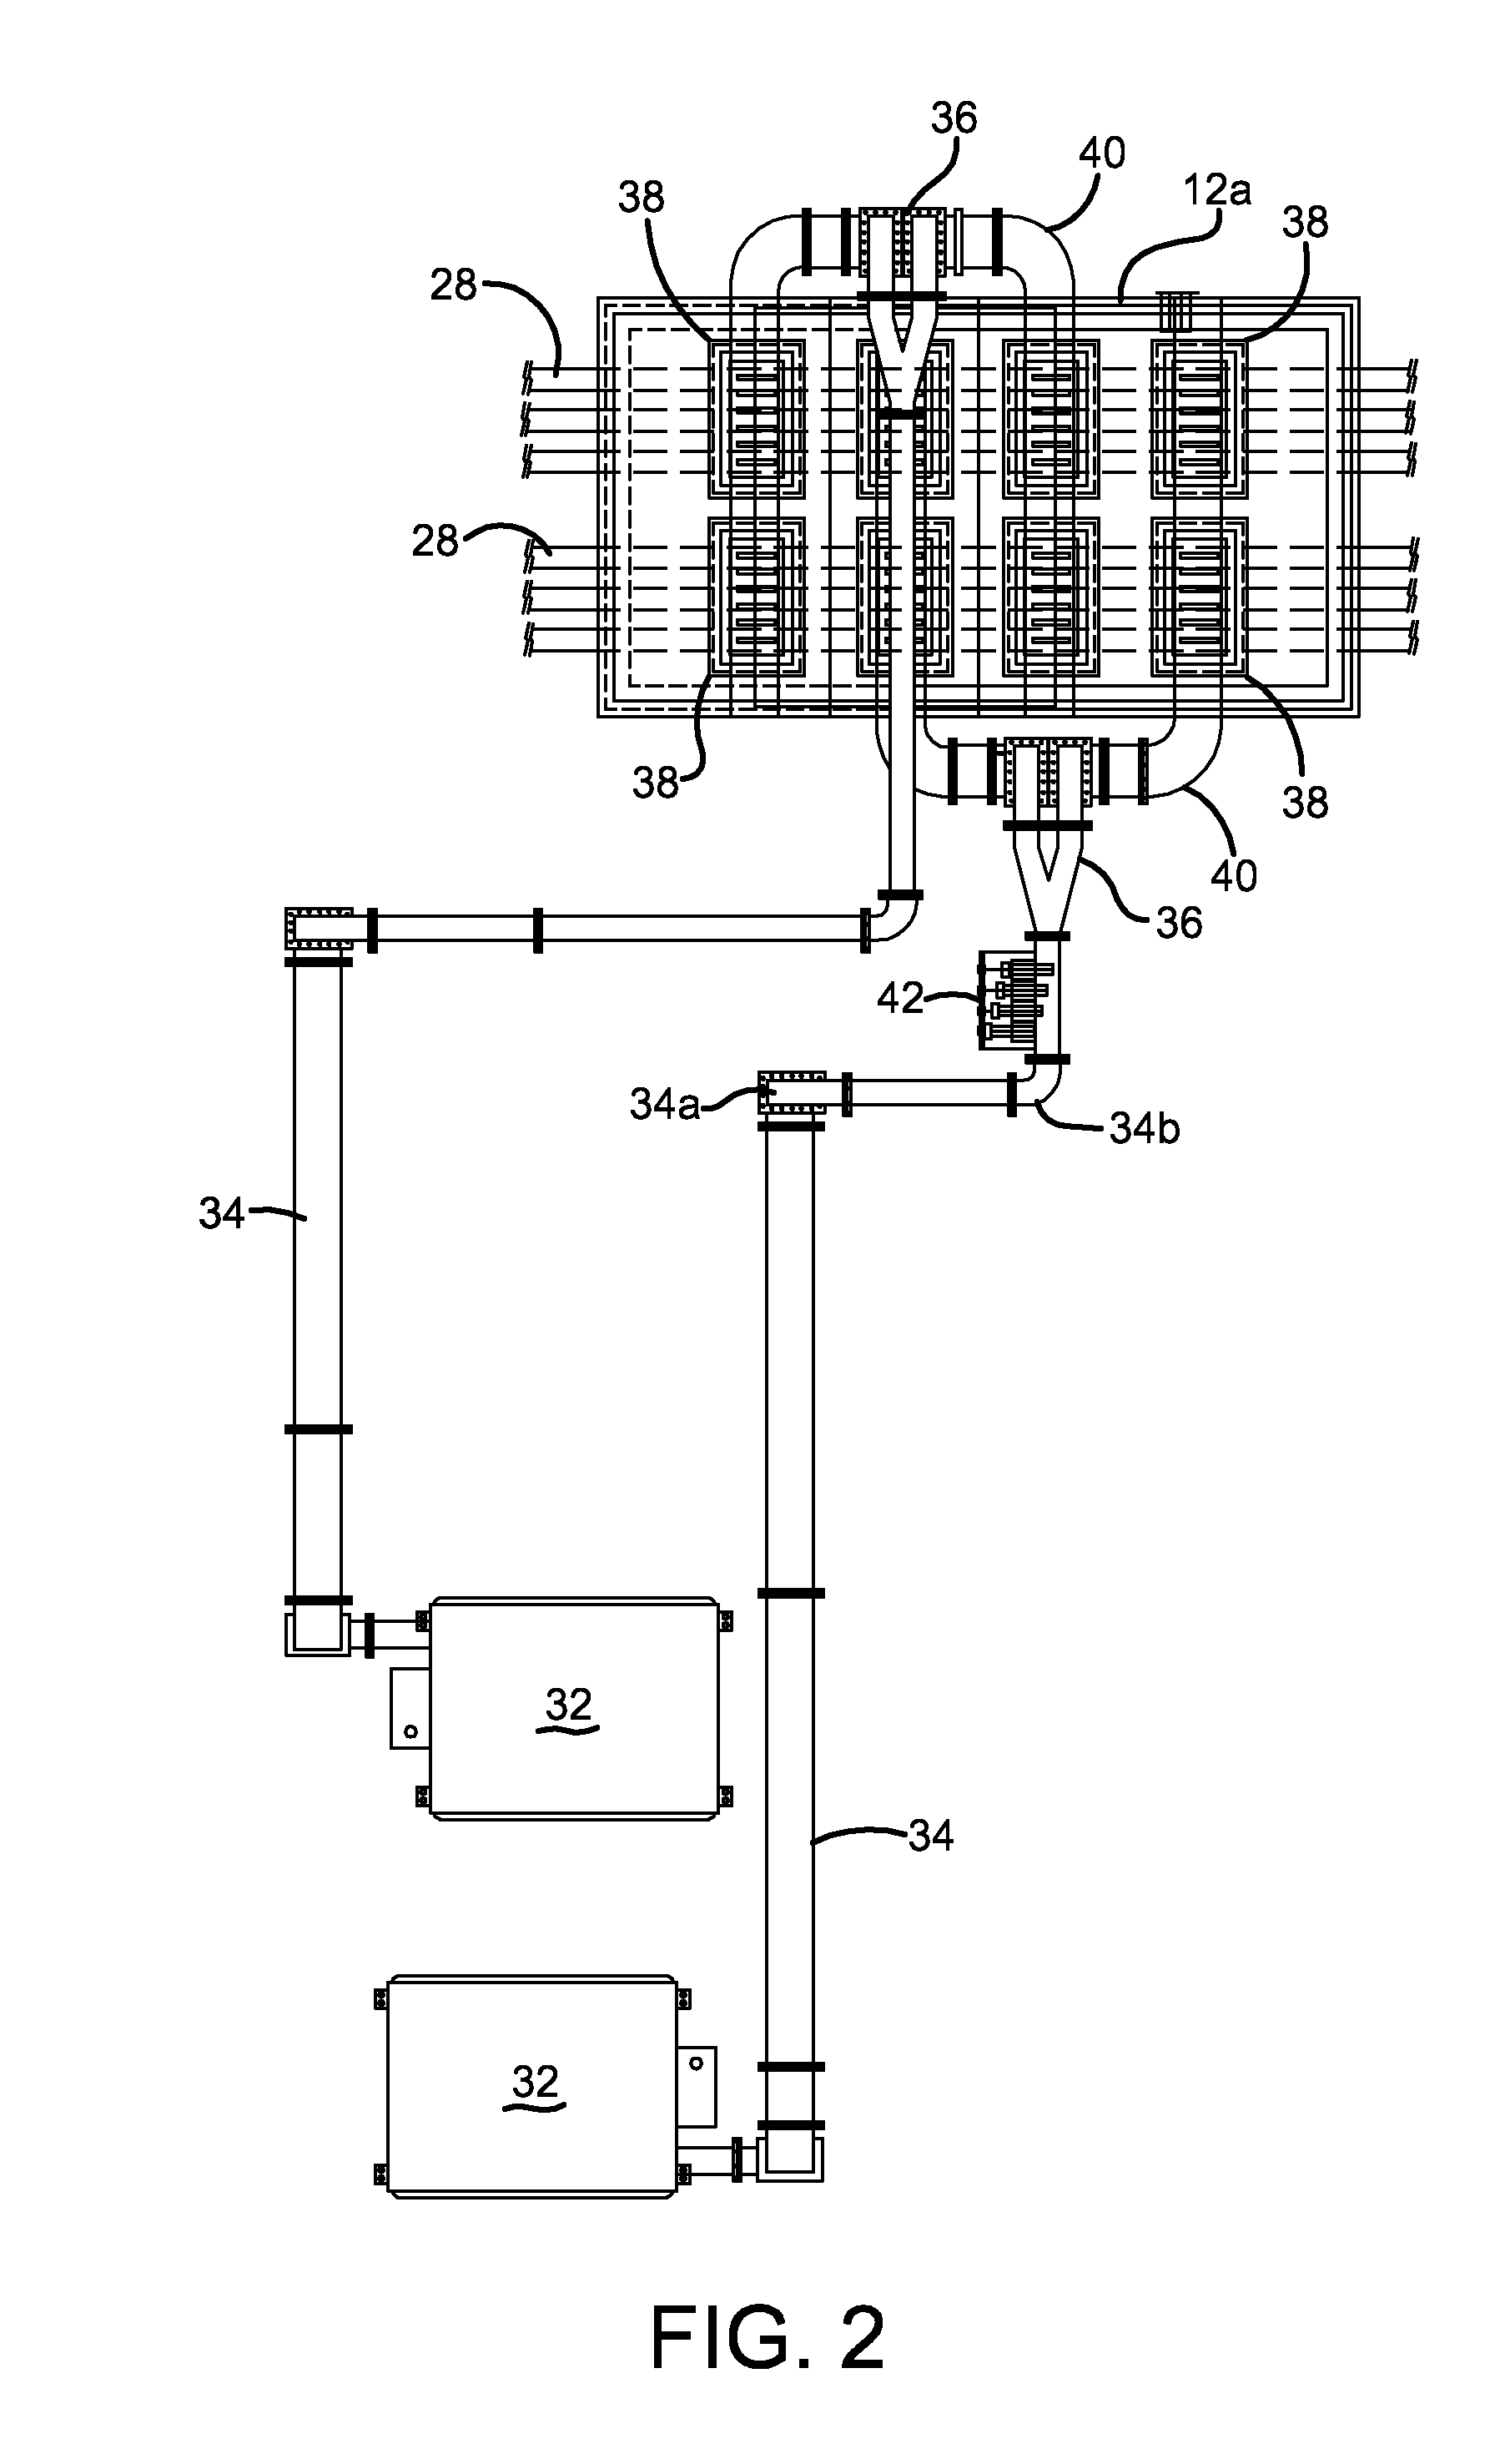 Method and apparatus for dual applicator microwave design